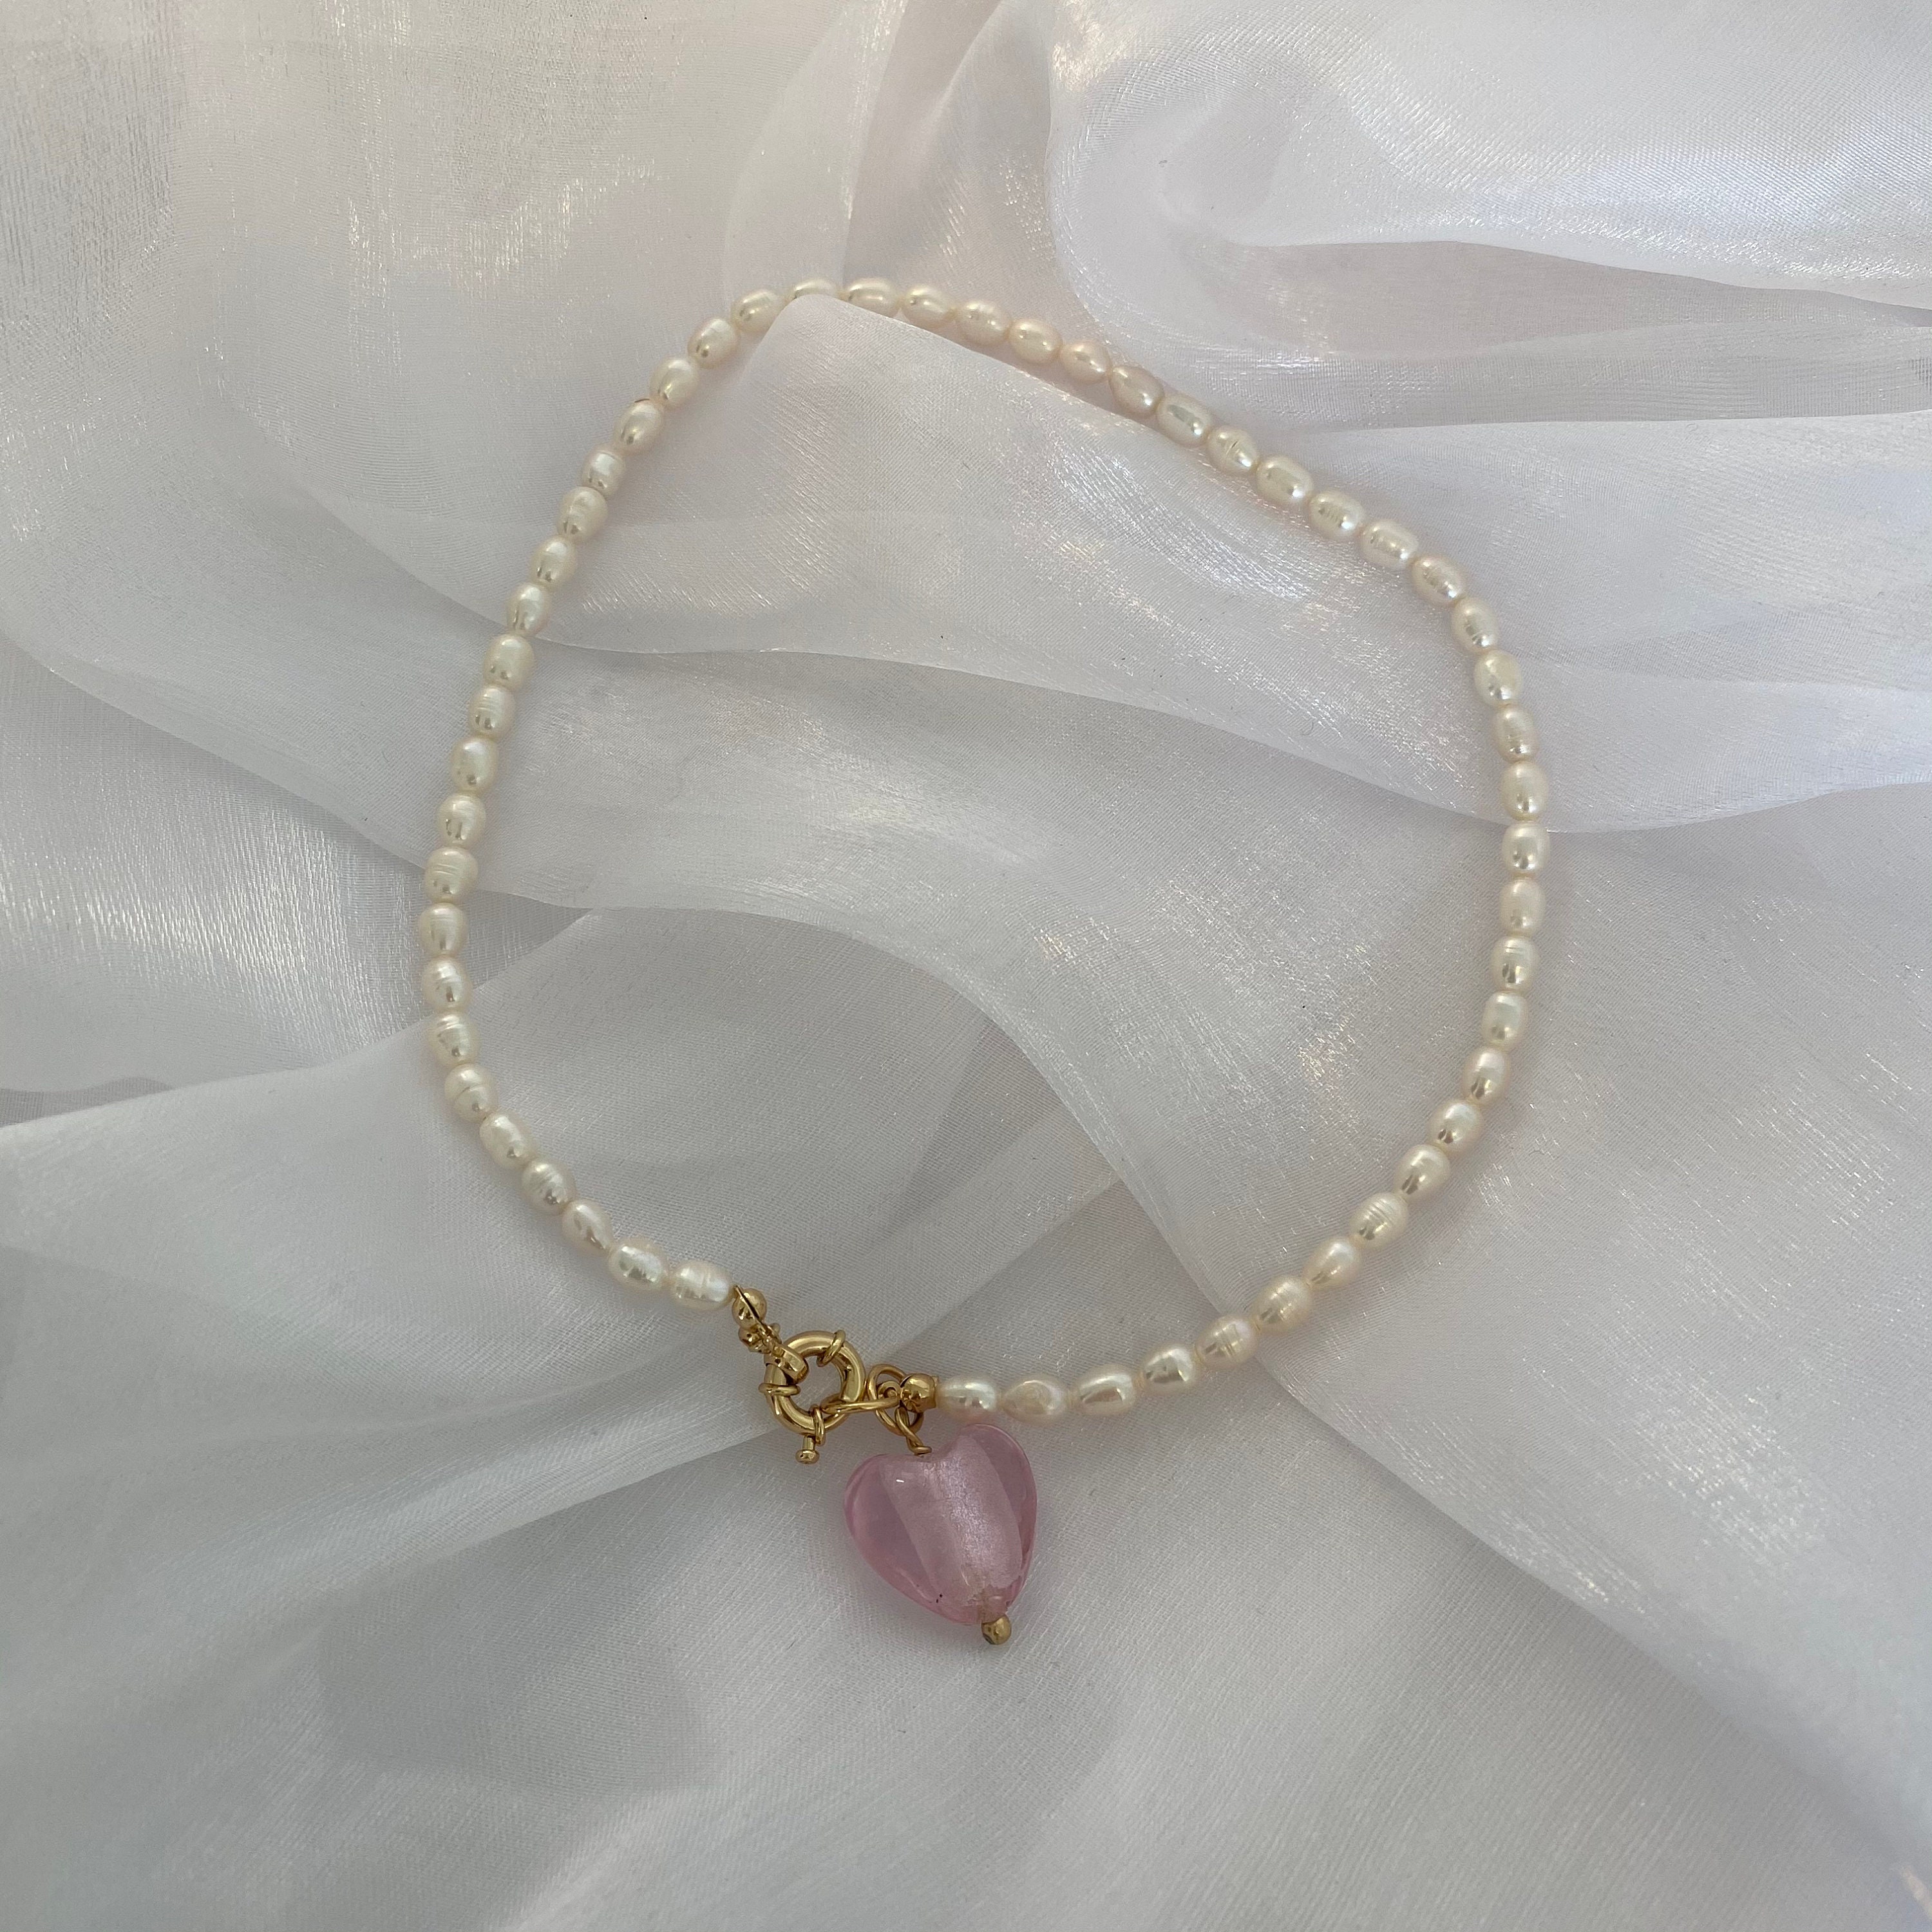 Pearl Choker necklace with Pink Heart Glass pendant | Etsy